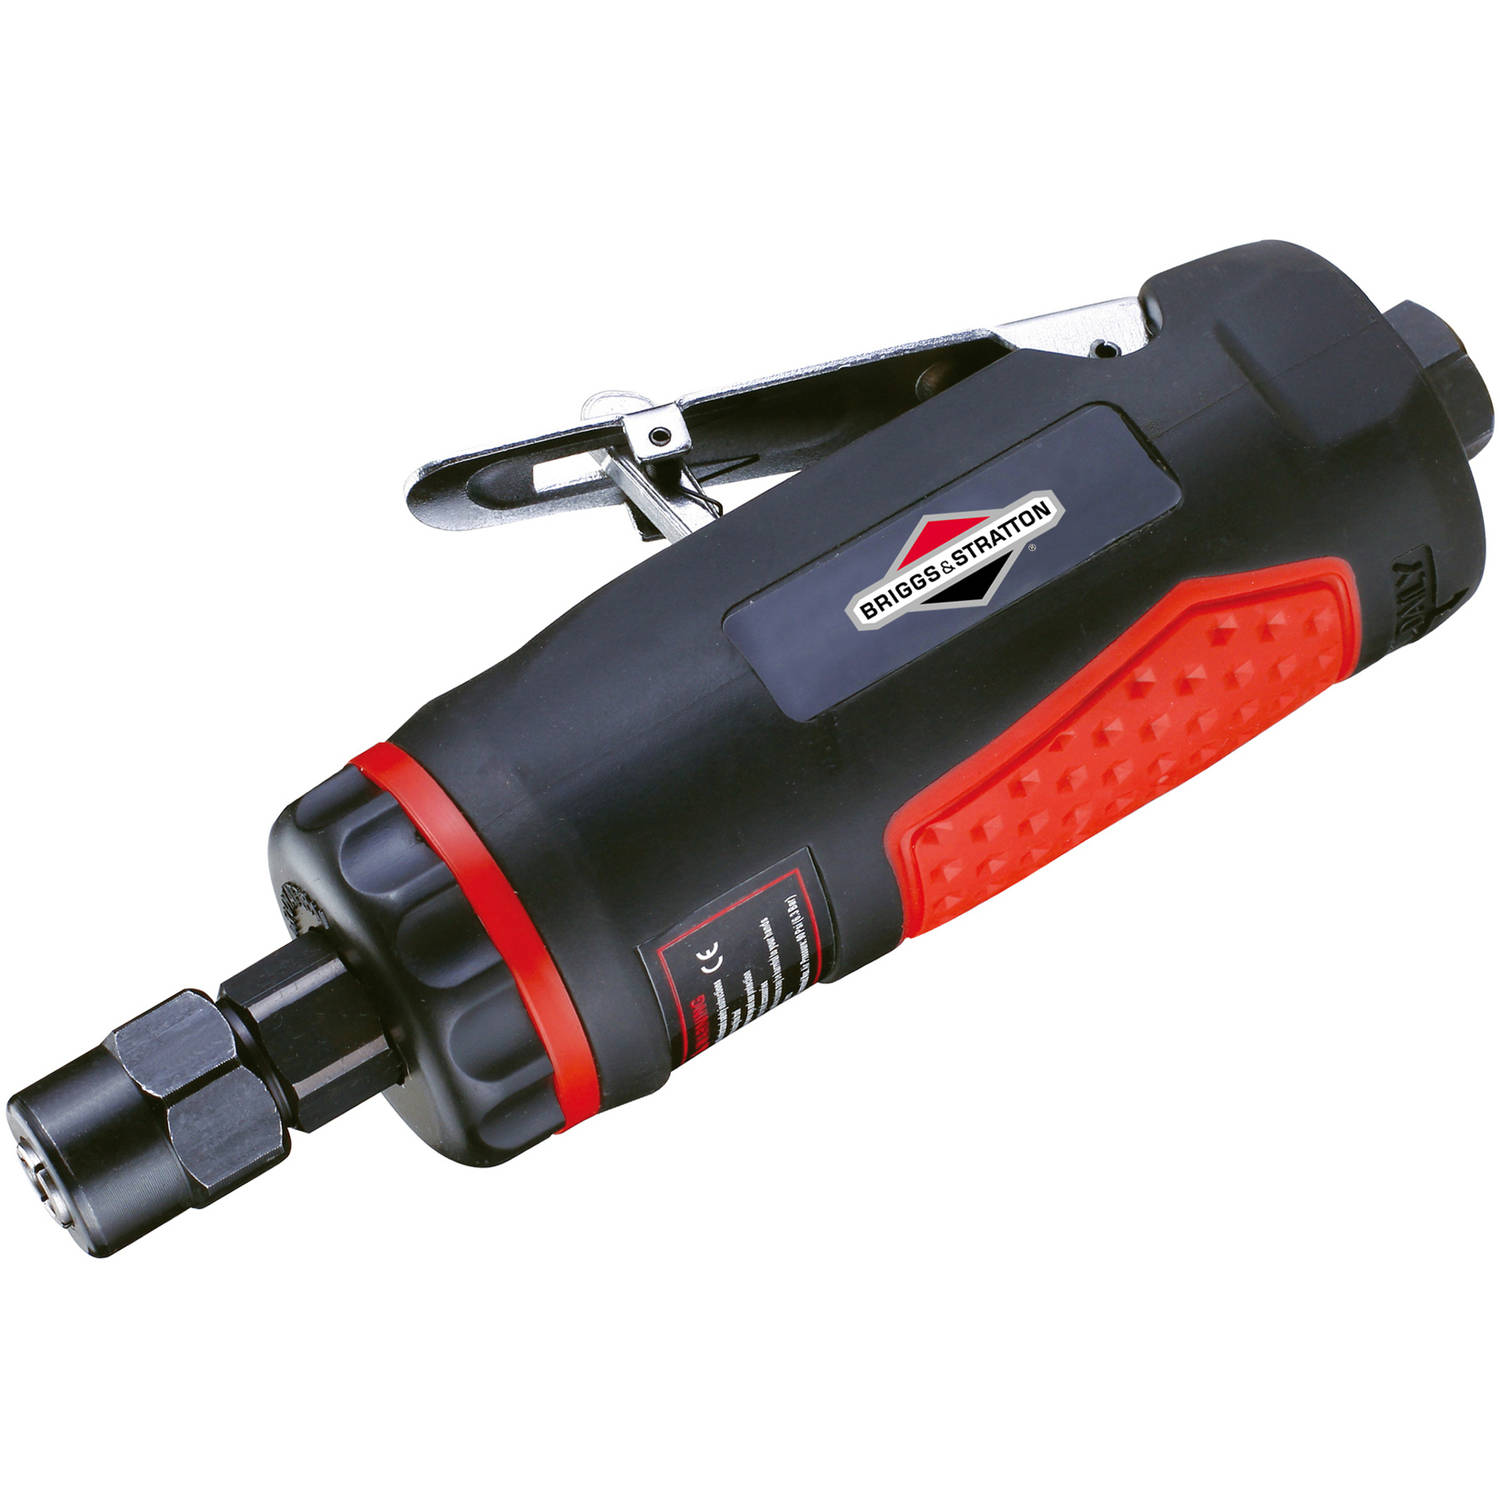 Alton Industry Briggs and Stratton Air Tools and Accessories Air Die Grinder, BSTDG001 - image 1 of 2